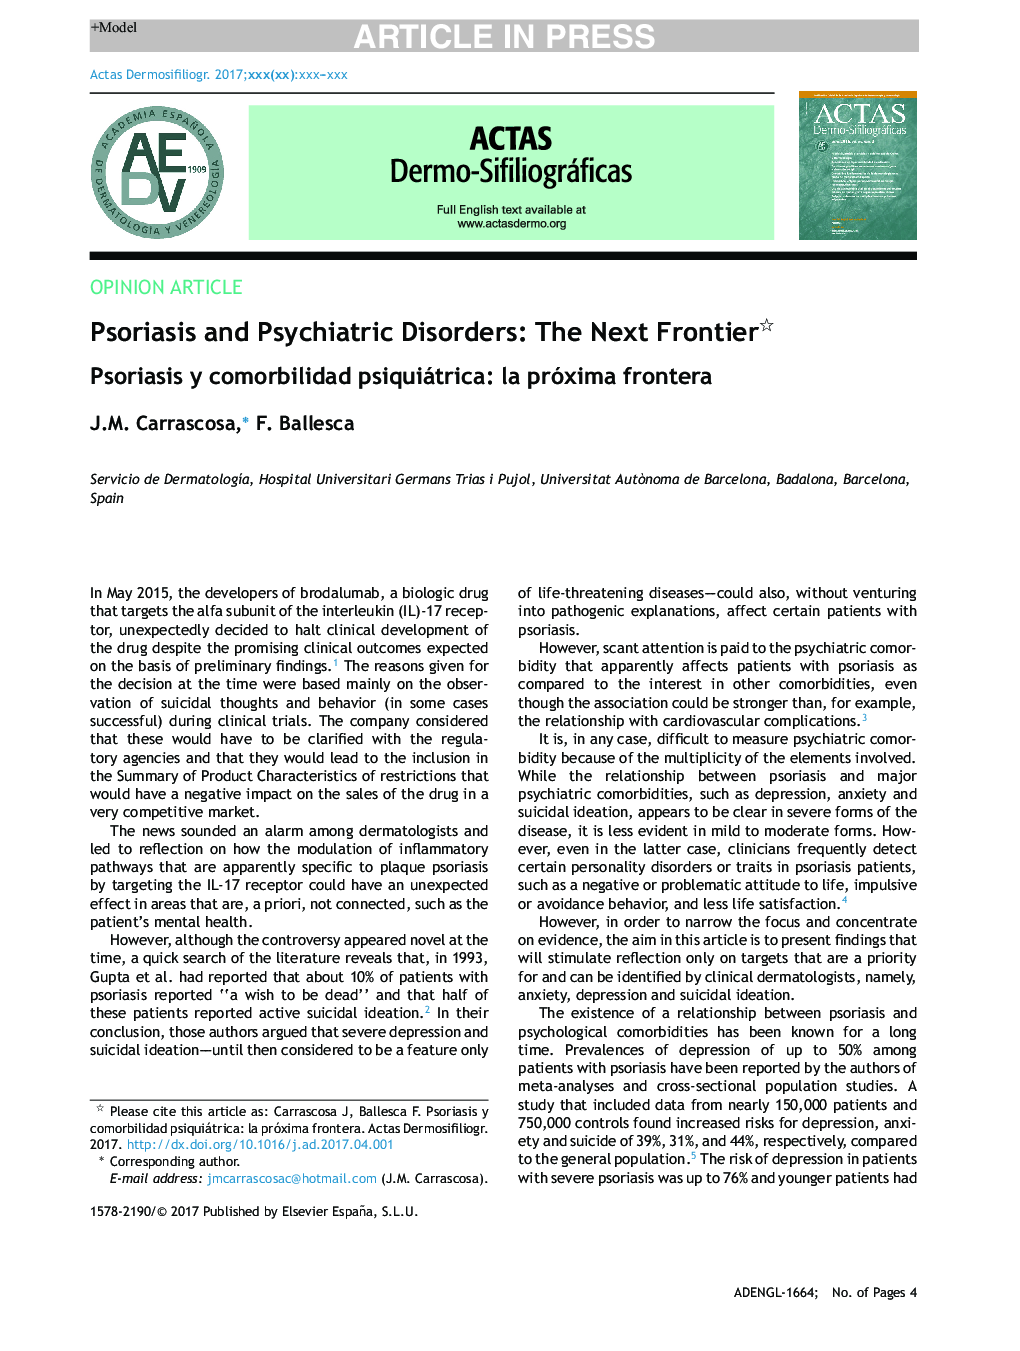 Psoriasis and Psychiatric Disorders: The Next Frontier